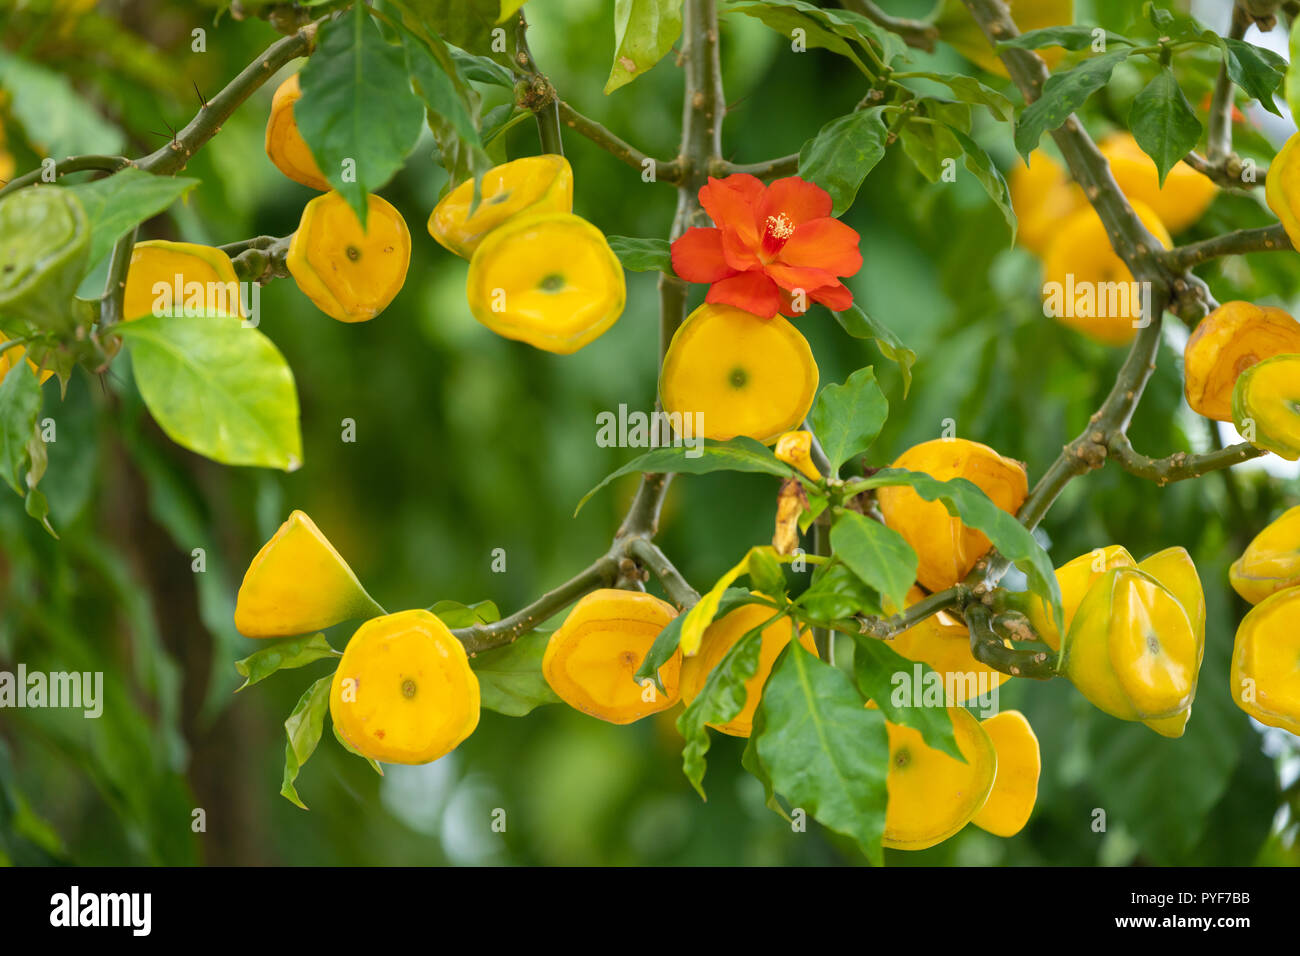 Flowers and fruits of a beautiful Pereskia Bleo tree in an Indonesian garden Stock Photo